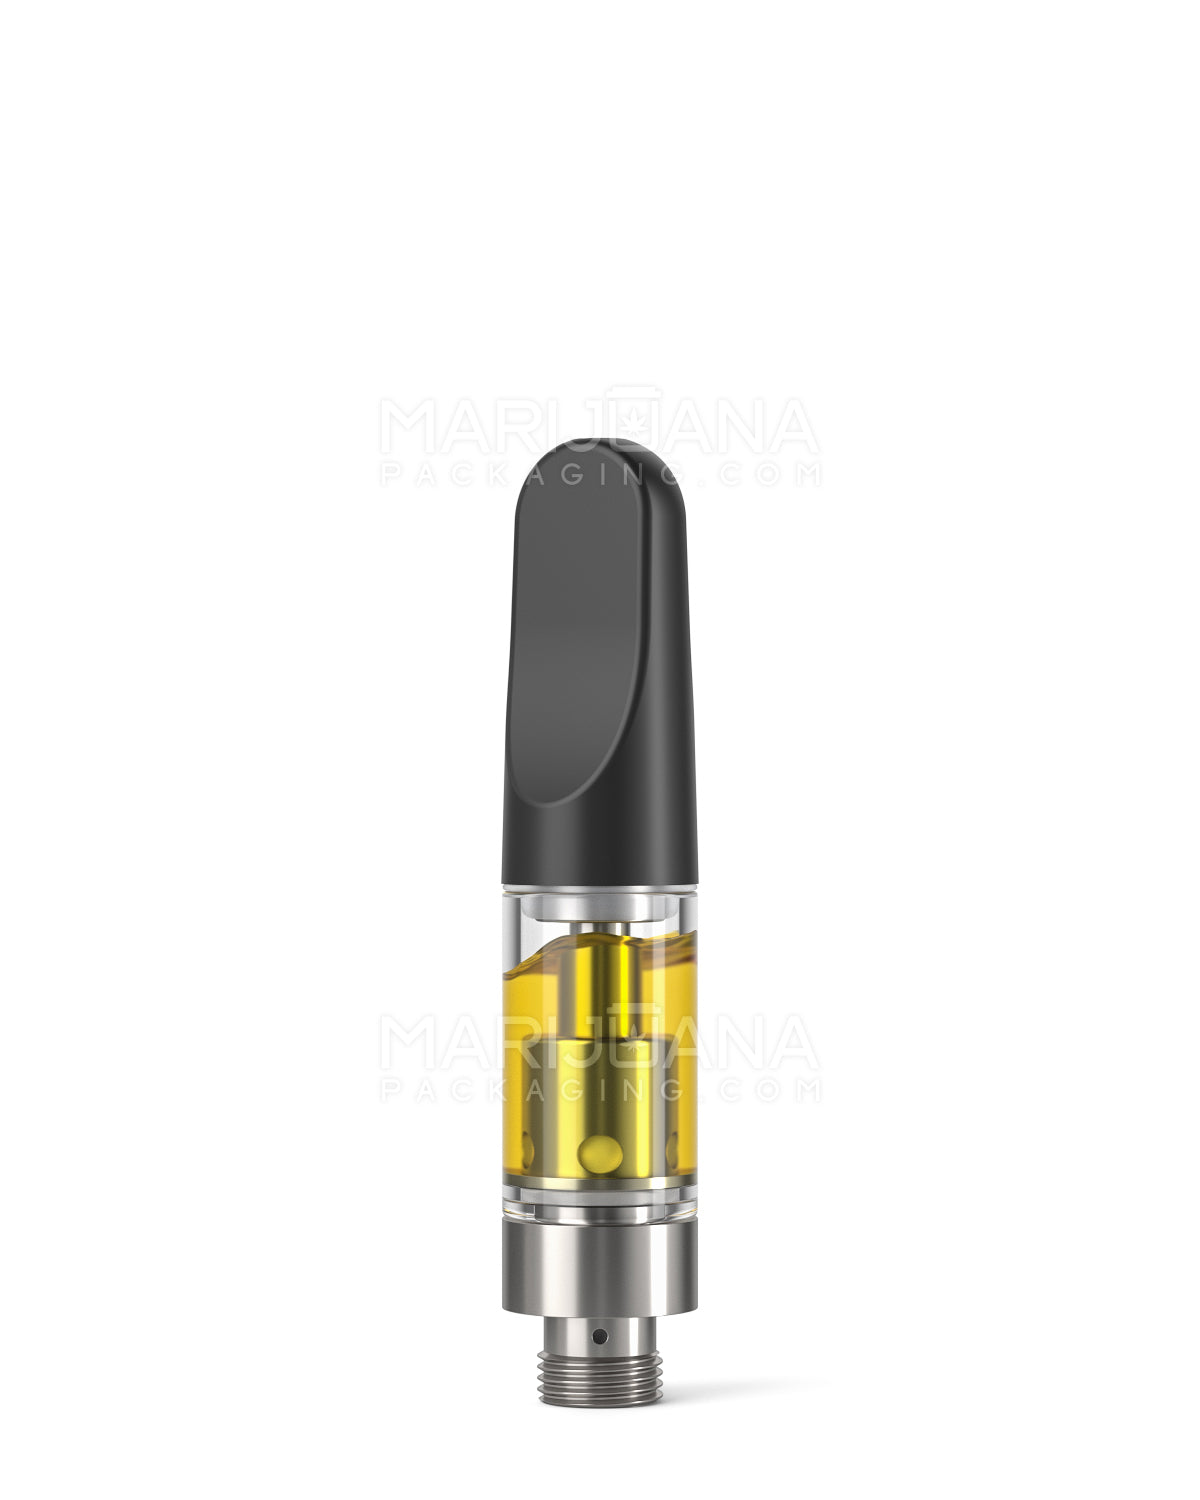 CCELL | Liquid6 Reactor Glass Vape Cartridge with Black Plastic Mouthpiece | 0.5mL - Screw On - 100 Count - 2